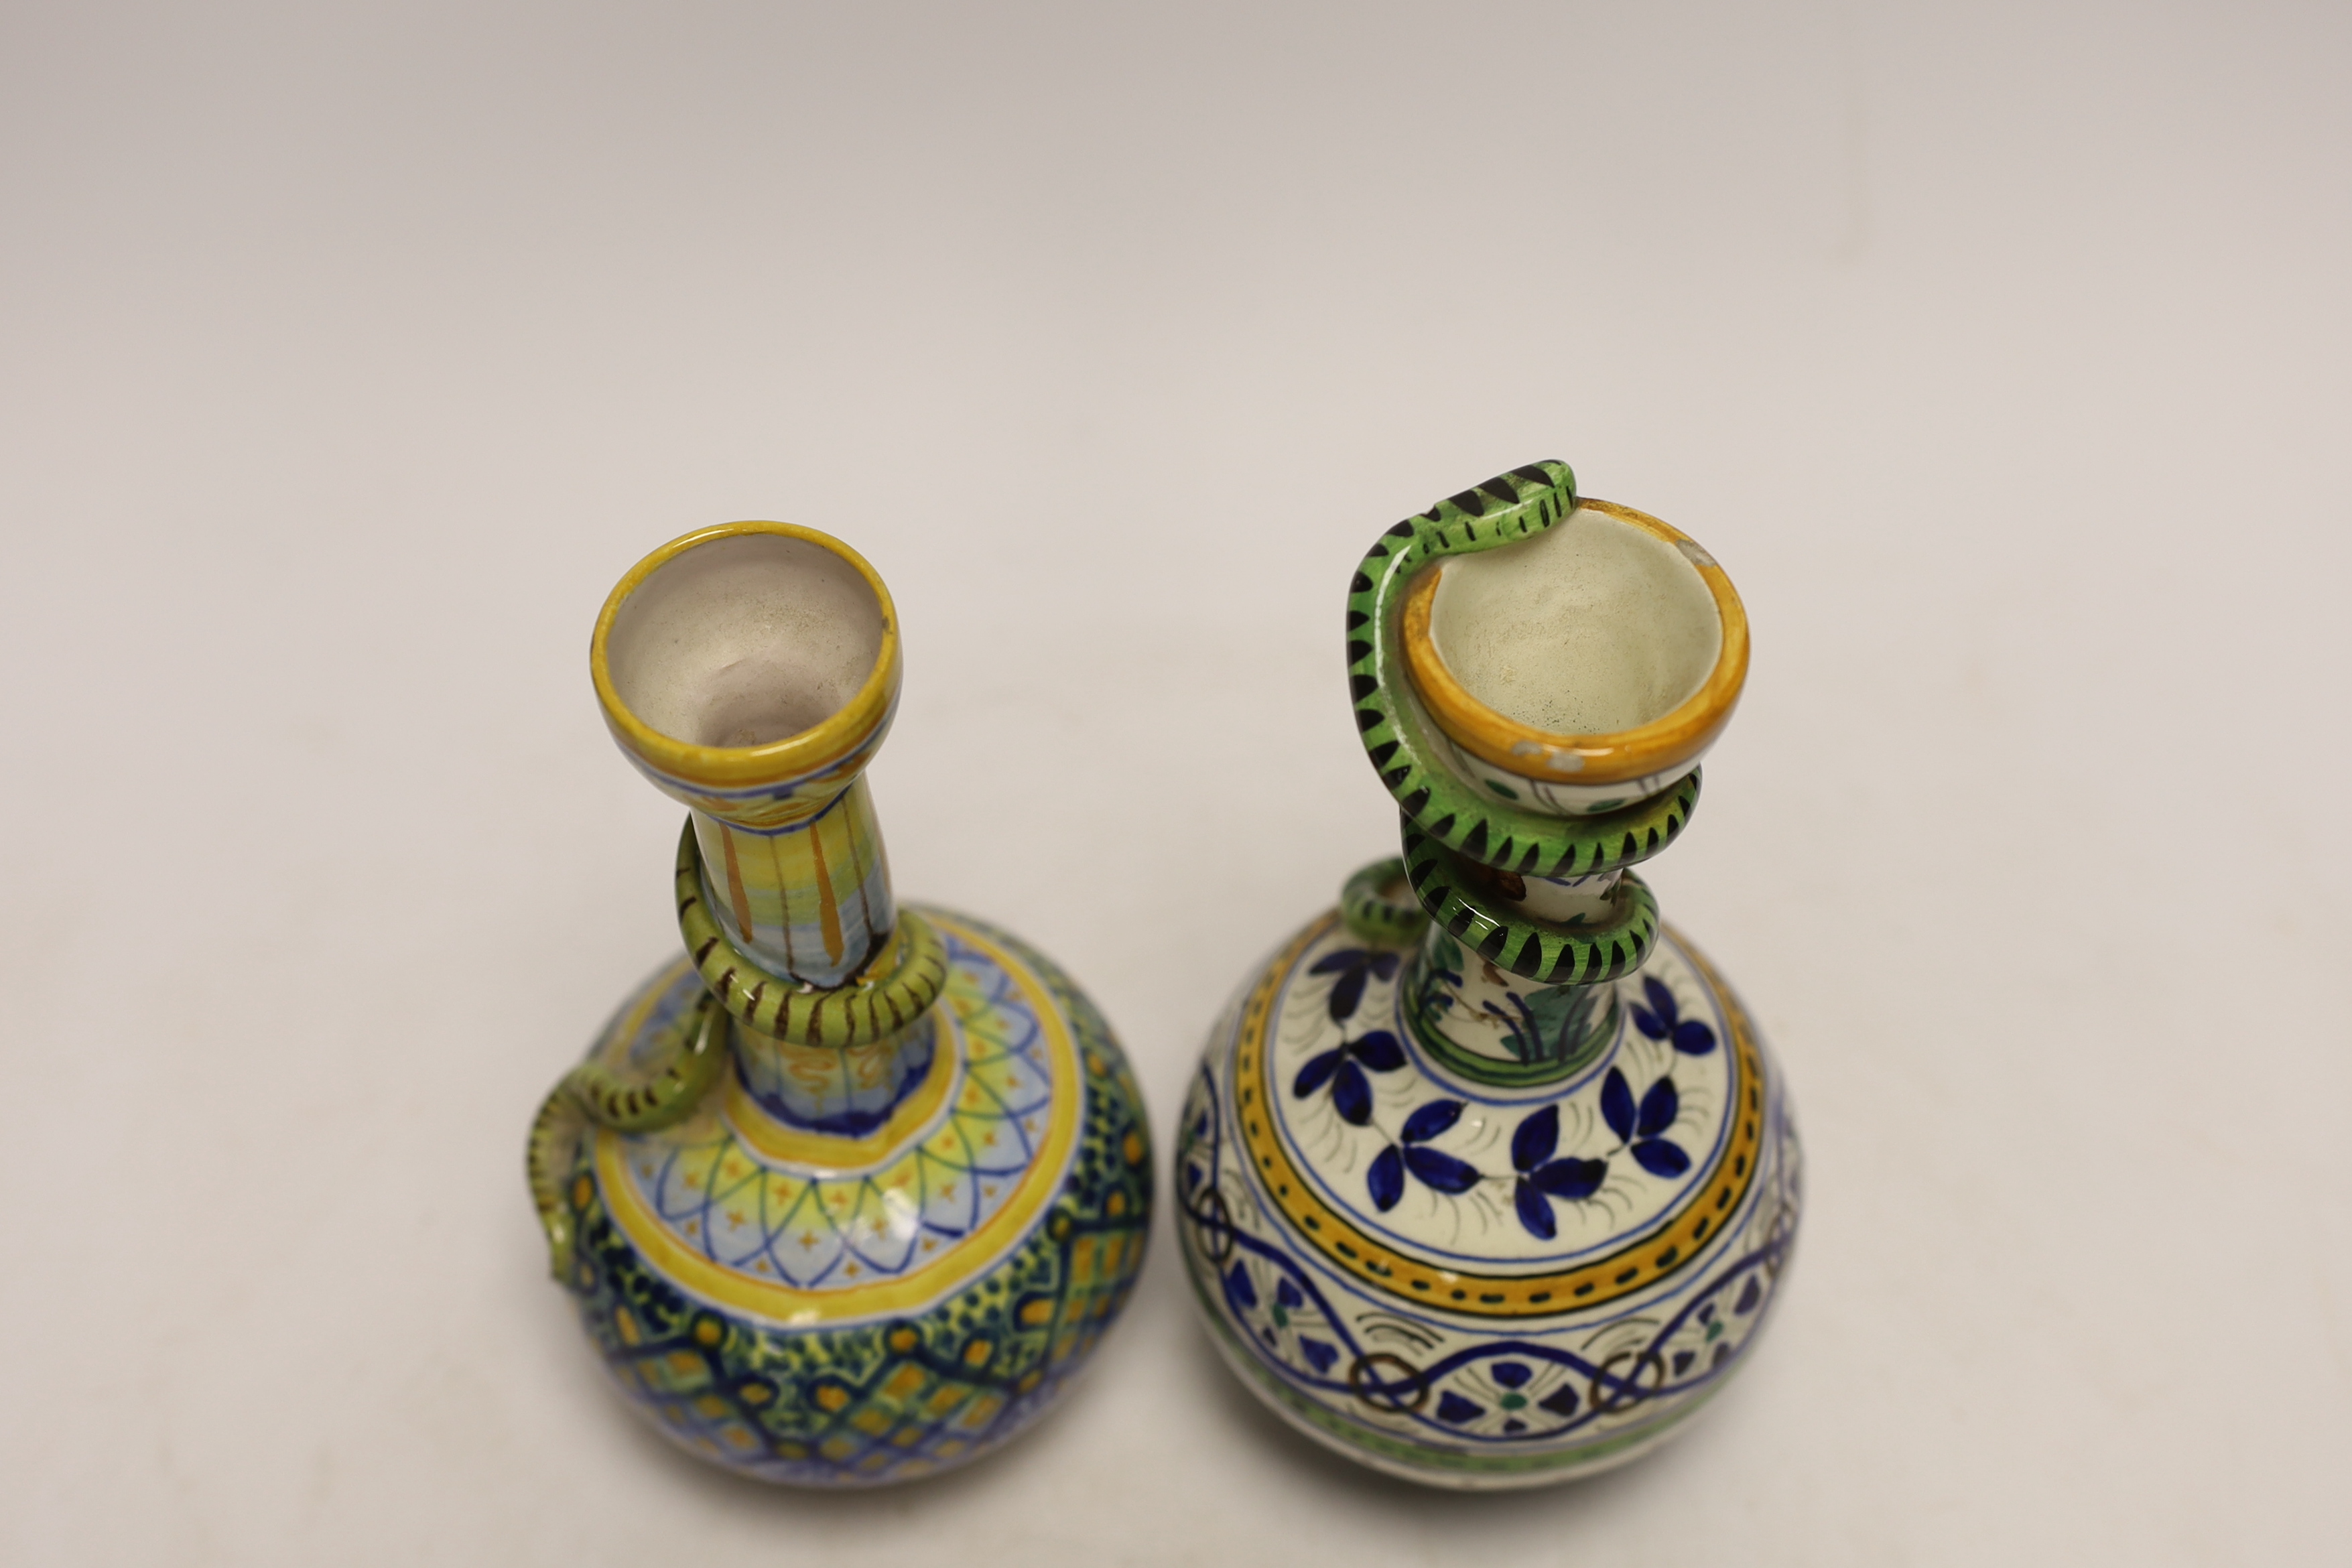 Two Italian Maiolica bottle vases, one by Cantagalli, largest 18cm high